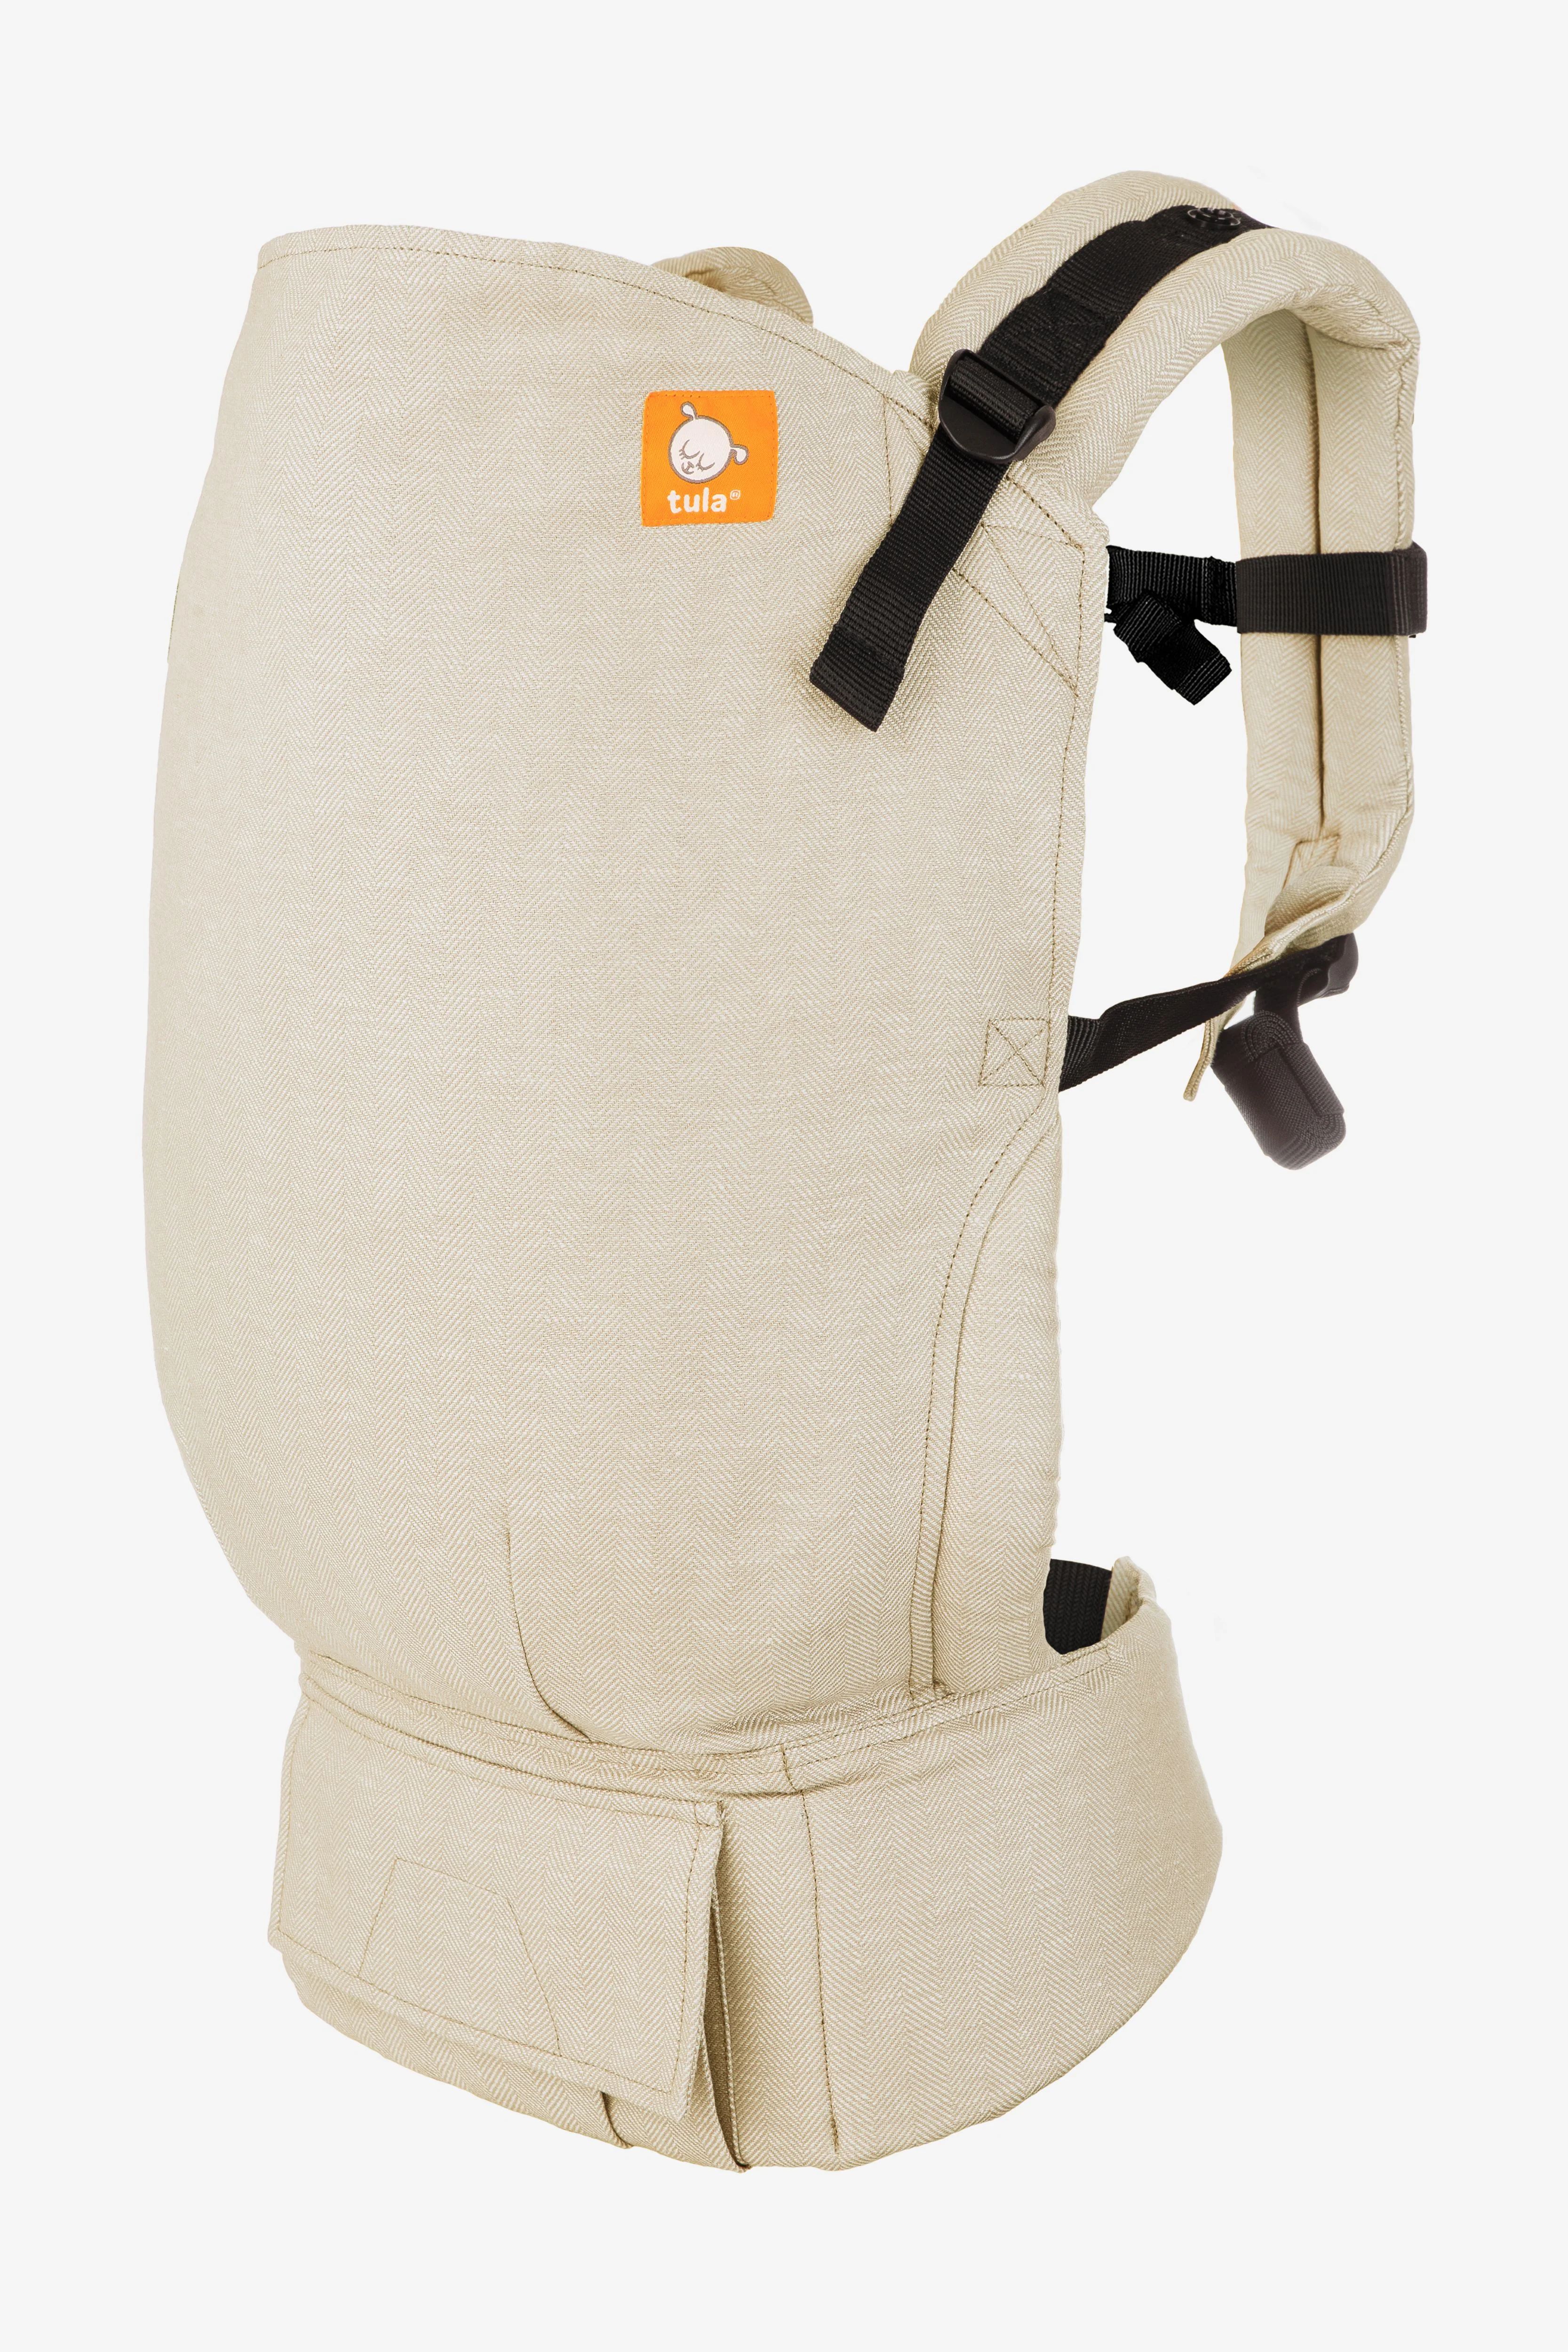 Sand Linen – Tula Toddler Carrier - Tula US | Baby Tula